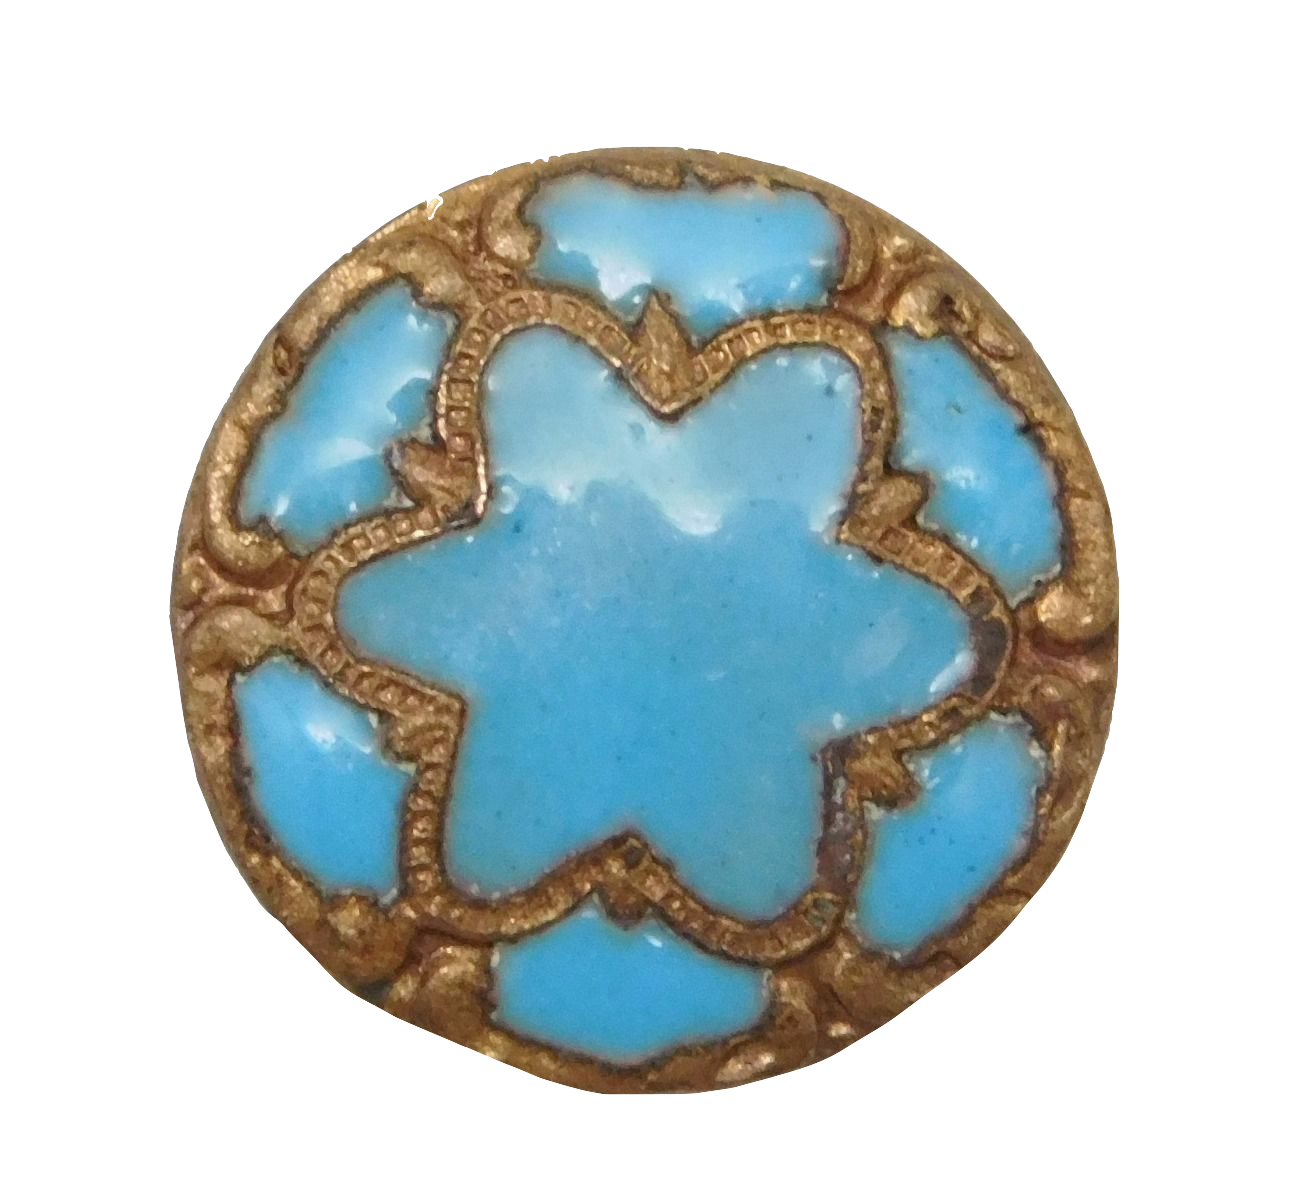 Beautiful Antique Metal Enamel Blue Turquoise Button with gold trim